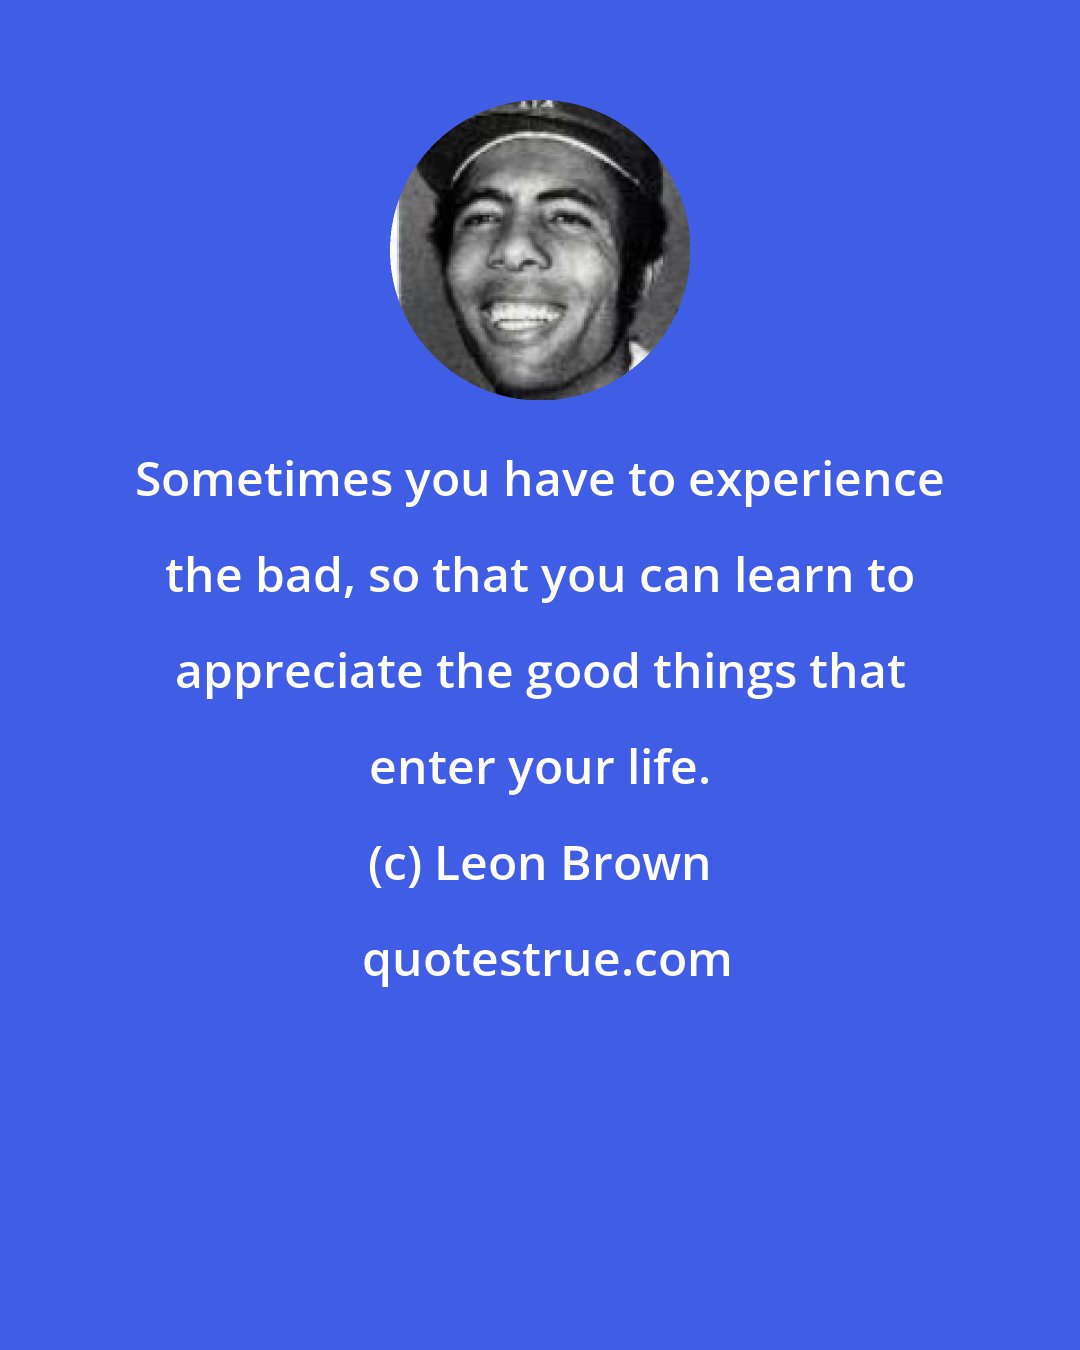 Leon Brown: Sometimes you have to experience the bad, so that you can learn to appreciate the good things that enter your life.